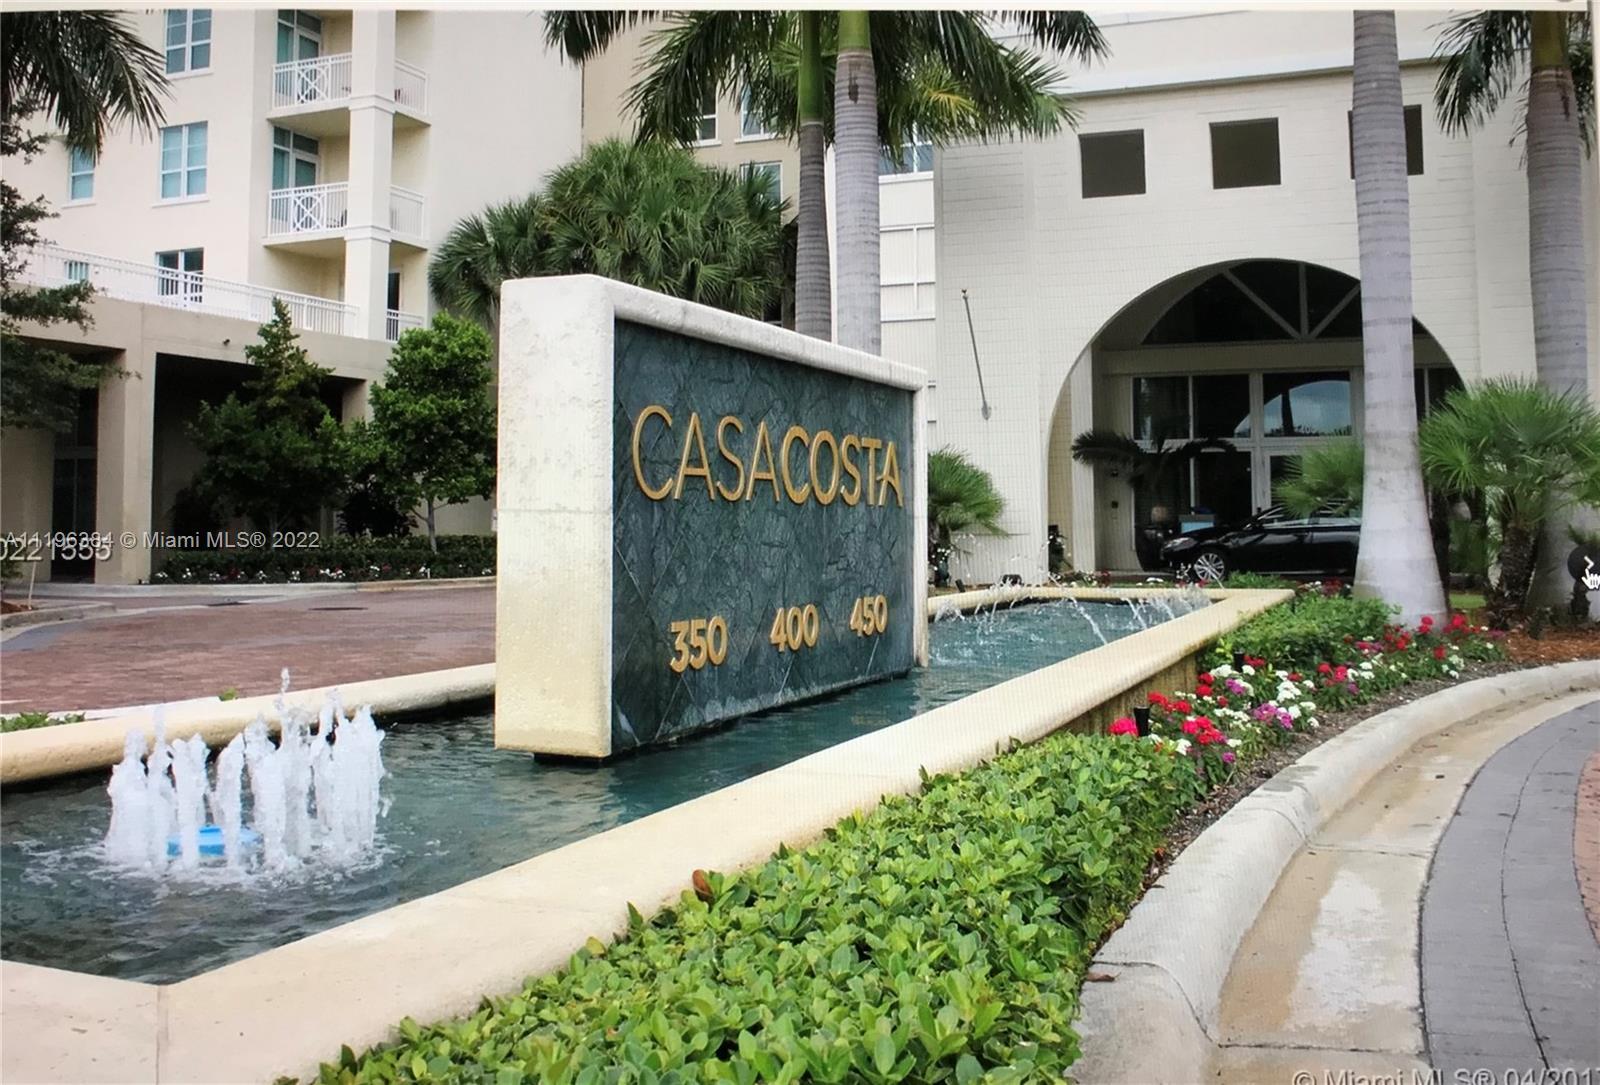 Nice 2/2 for sale at CASA COSTA. Tropically landscaped complex, with Olympic-length lap pool;  whirl